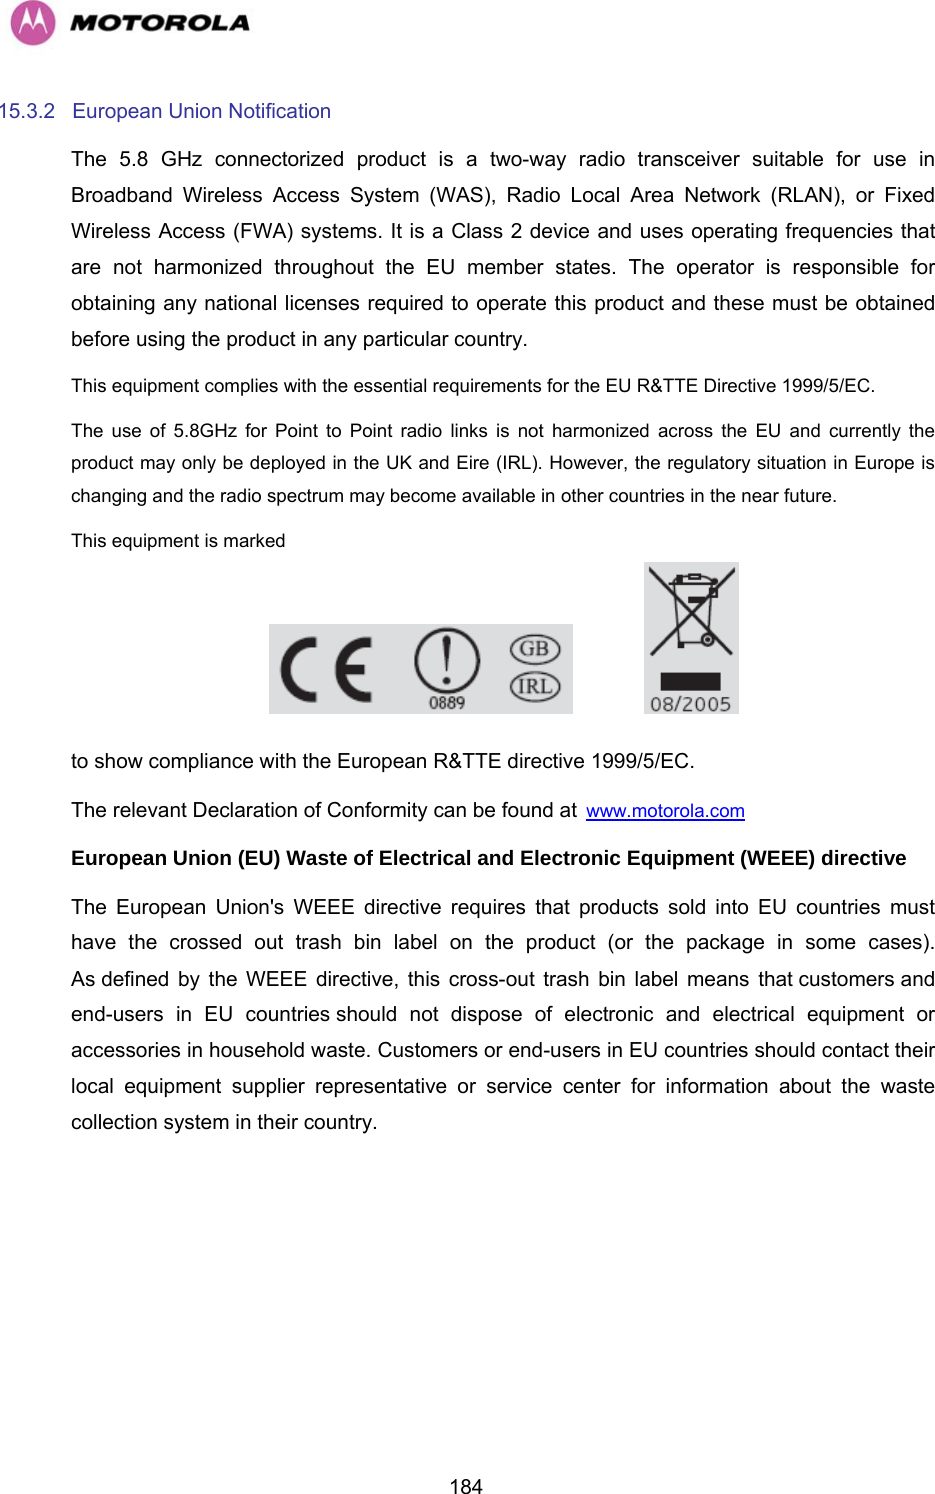   18415.3.2 European Union Notification The 5.8 GHz connectorized product is a two-way radio transceiver suitable for use in Broadband Wireless Access System (WAS), Radio Local Area Network (RLAN), or Fixed Wireless Access (FWA) systems. It is a Class 2 device and uses operating frequencies that are not harmonized throughout the EU member states. The operator is responsible for obtaining any national licenses required to operate this product and these must be obtained before using the product in any particular country. This equipment complies with the essential requirements for the EU R&amp;TTE Directive 1999/5/EC. The use of 5.8GHz for Point to Point radio links is not harmonized across the EU and currently the product may only be deployed in the UK and Eire (IRL). However, the regulatory situation in Europe is changing and the radio spectrum may become available in other countries in the near future.  This equipment is marked      to show compliance with the European R&amp;TTE directive 1999/5/EC. The relevant Declaration of Conformity can be found at Hwww.motorola.com  European Union (EU) Waste of Electrical and Electronic Equipment (WEEE) directive  The European Union&apos;s WEEE directive requires that products sold into EU countries must have the crossed out trash bin label on the product (or the package in some cases). As defined by the WEEE directive, this cross-out trash bin label means that customers and end-users in EU countries should not dispose of electronic and electrical equipment or accessories in household waste. Customers or end-users in EU countries should contact their local equipment supplier representative or service center for information about the waste collection system in their country. 